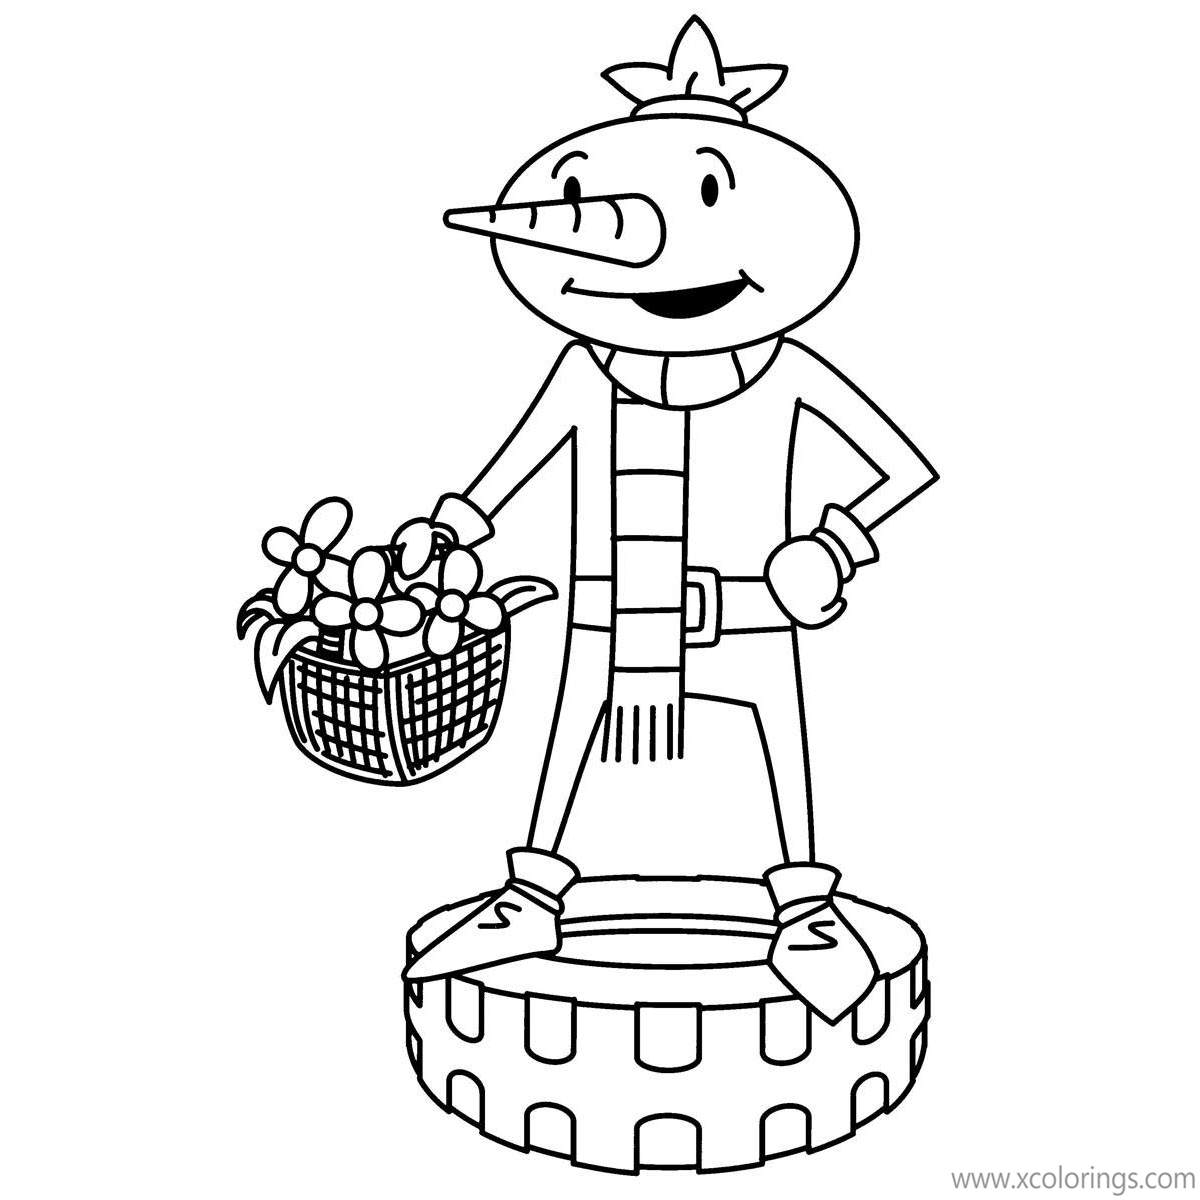 Free Bob The Builder Coloring Pages Spud with Flowers printable